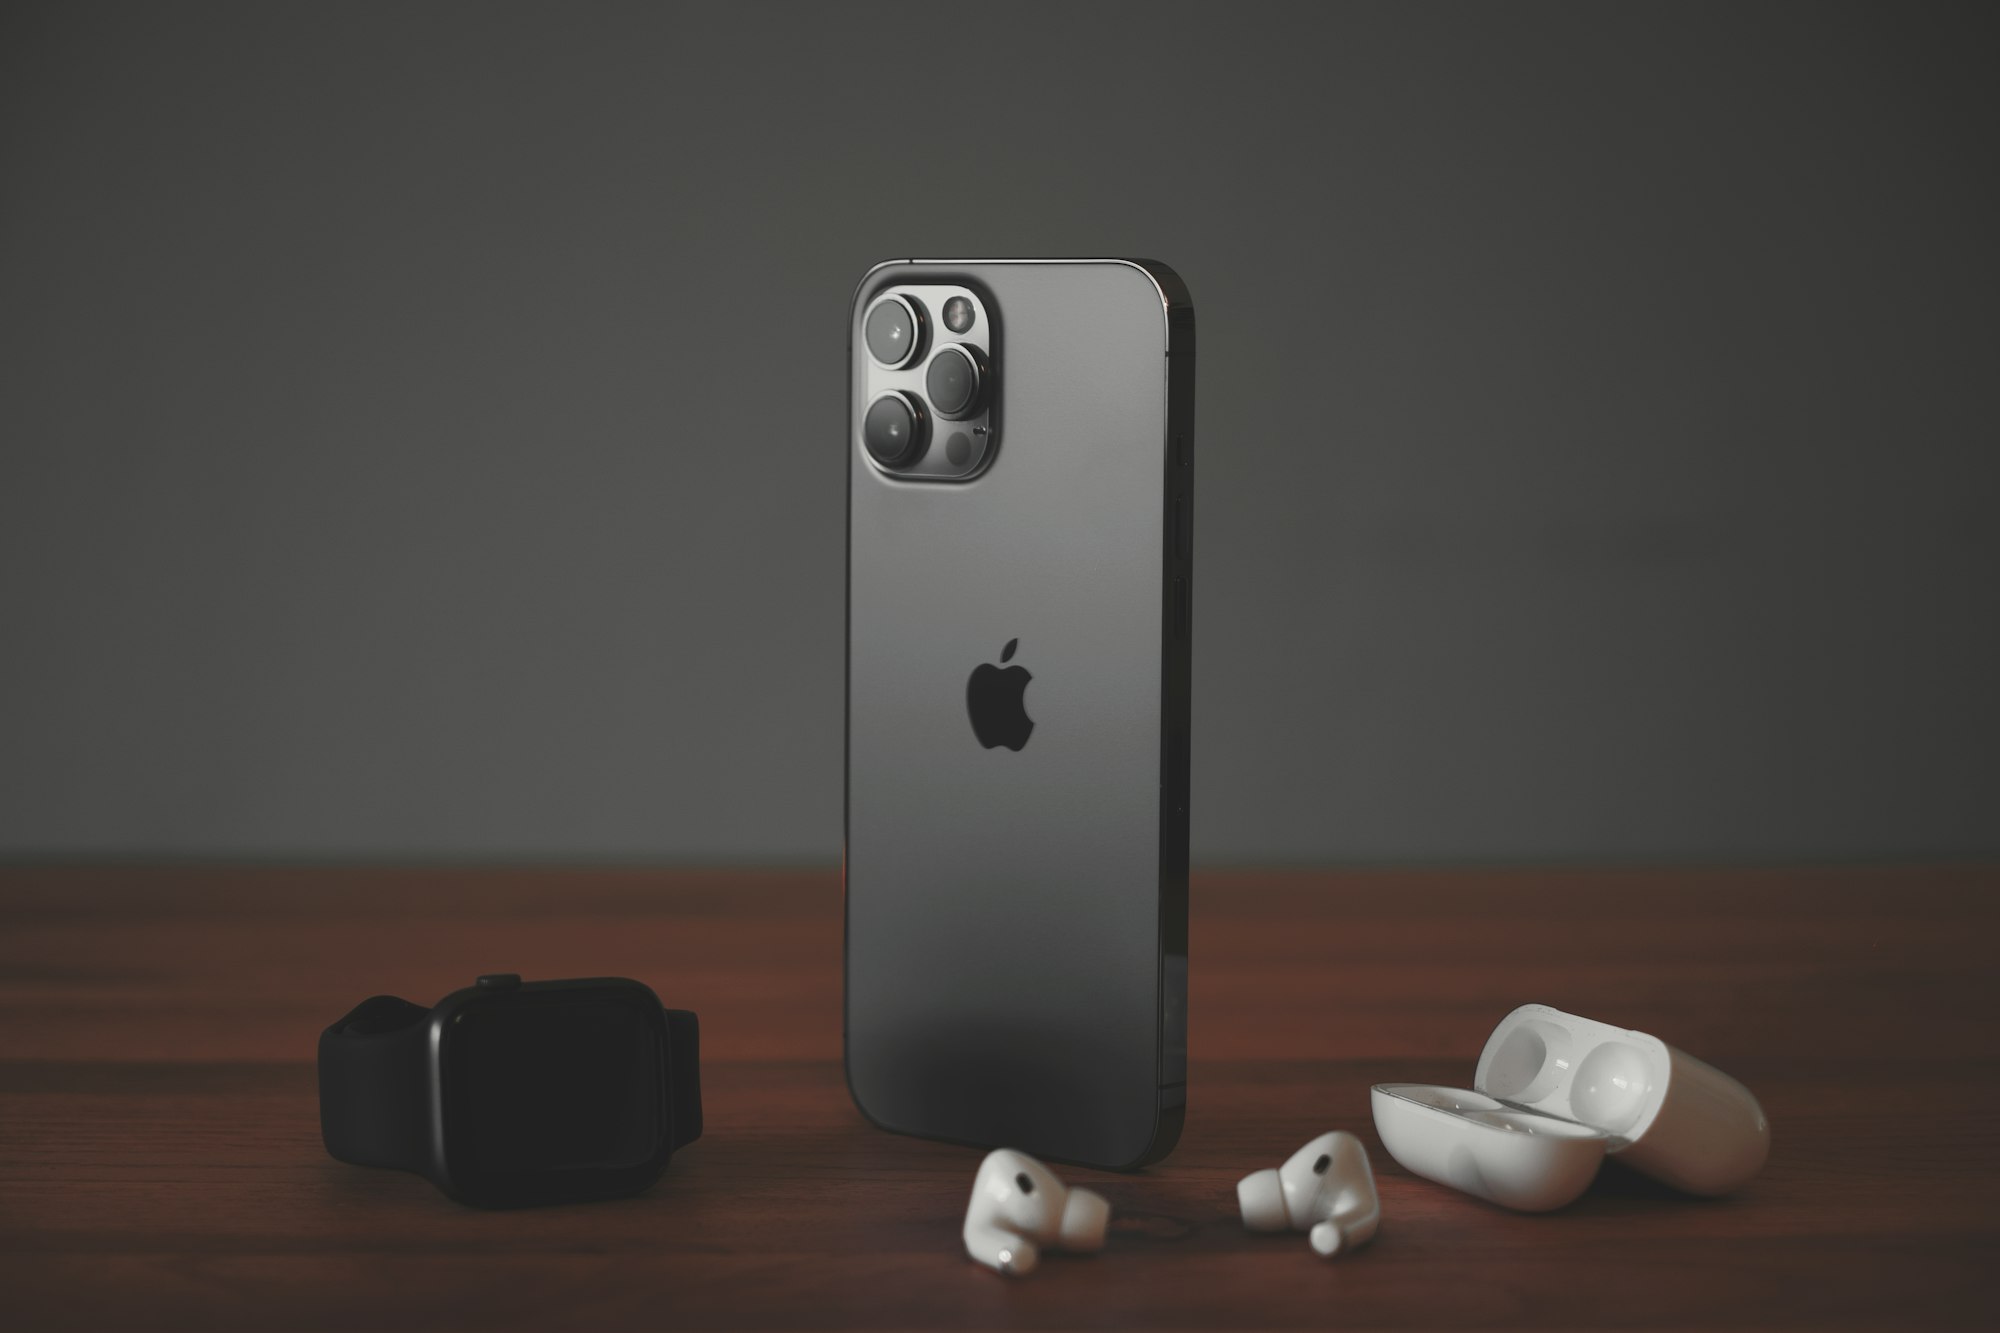 iPhone 12 Pro Max with AirPods Pro and Apple Watch Series 4